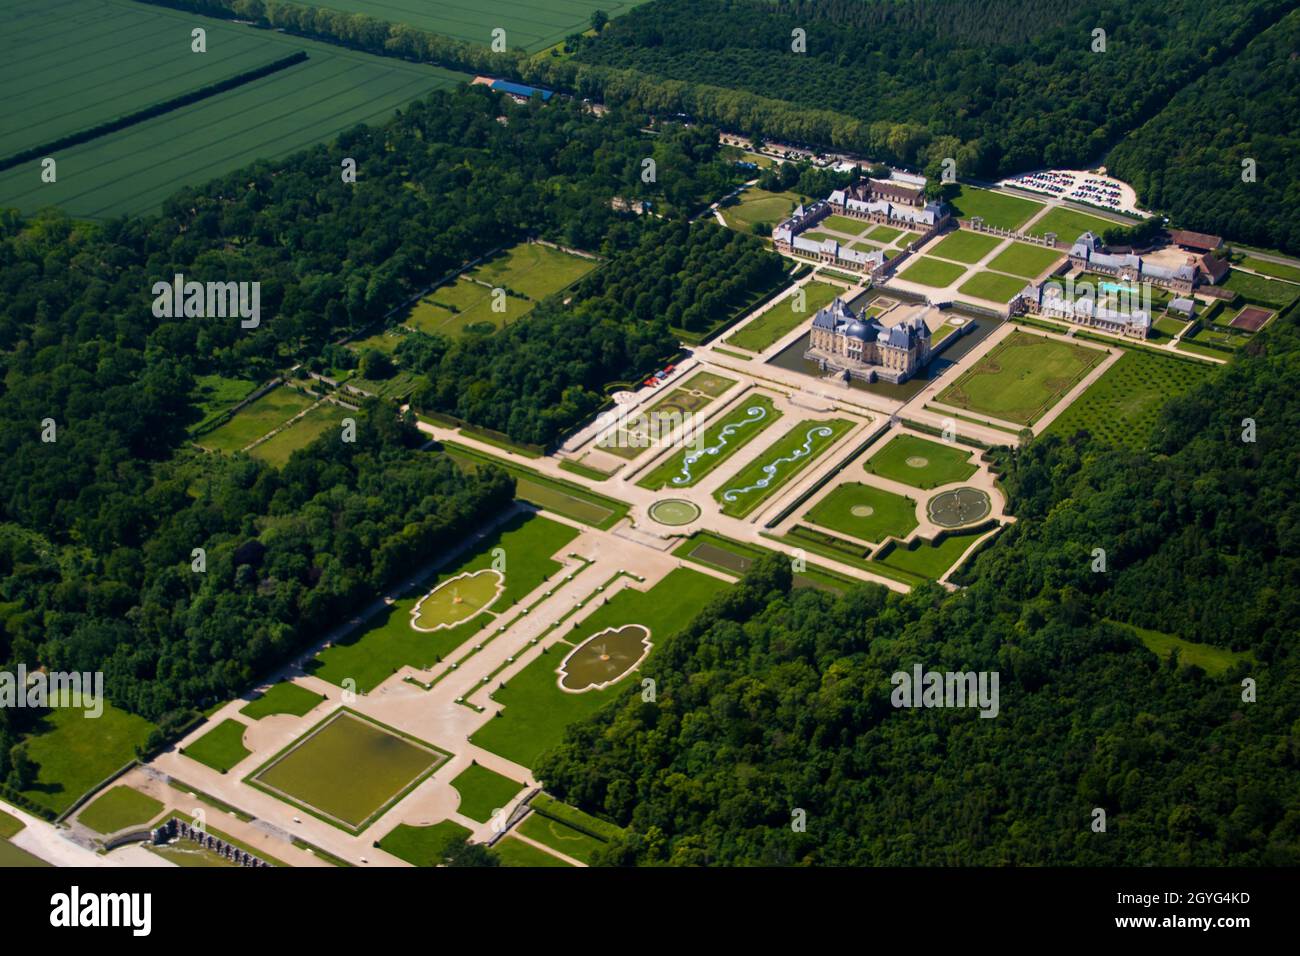 Aerial view of the castle and gardens of Vaux le Vicomte near Paris and Melun in Seine et Marne, France - Classic palace built by Nicolas Fouquet, sup Stock Photo